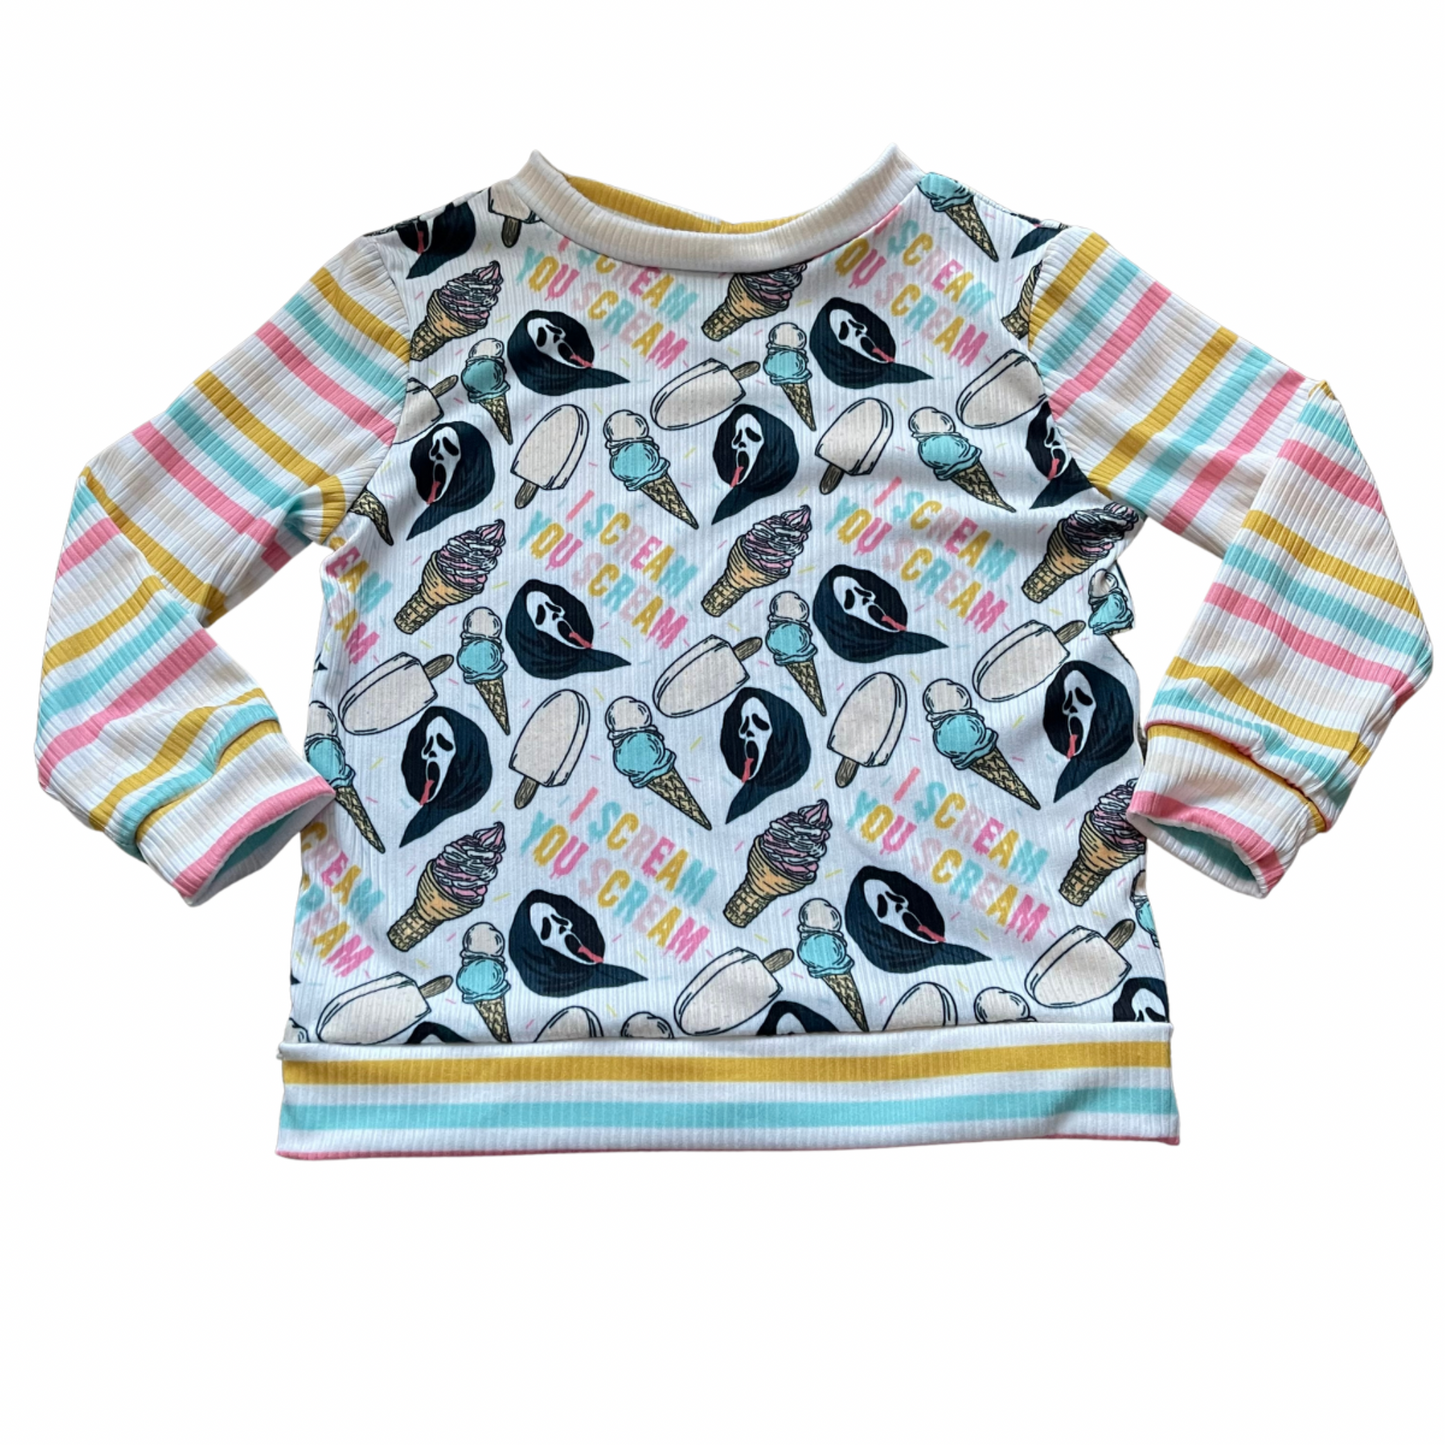 I Scream - Lounge Top - 2t and 4t